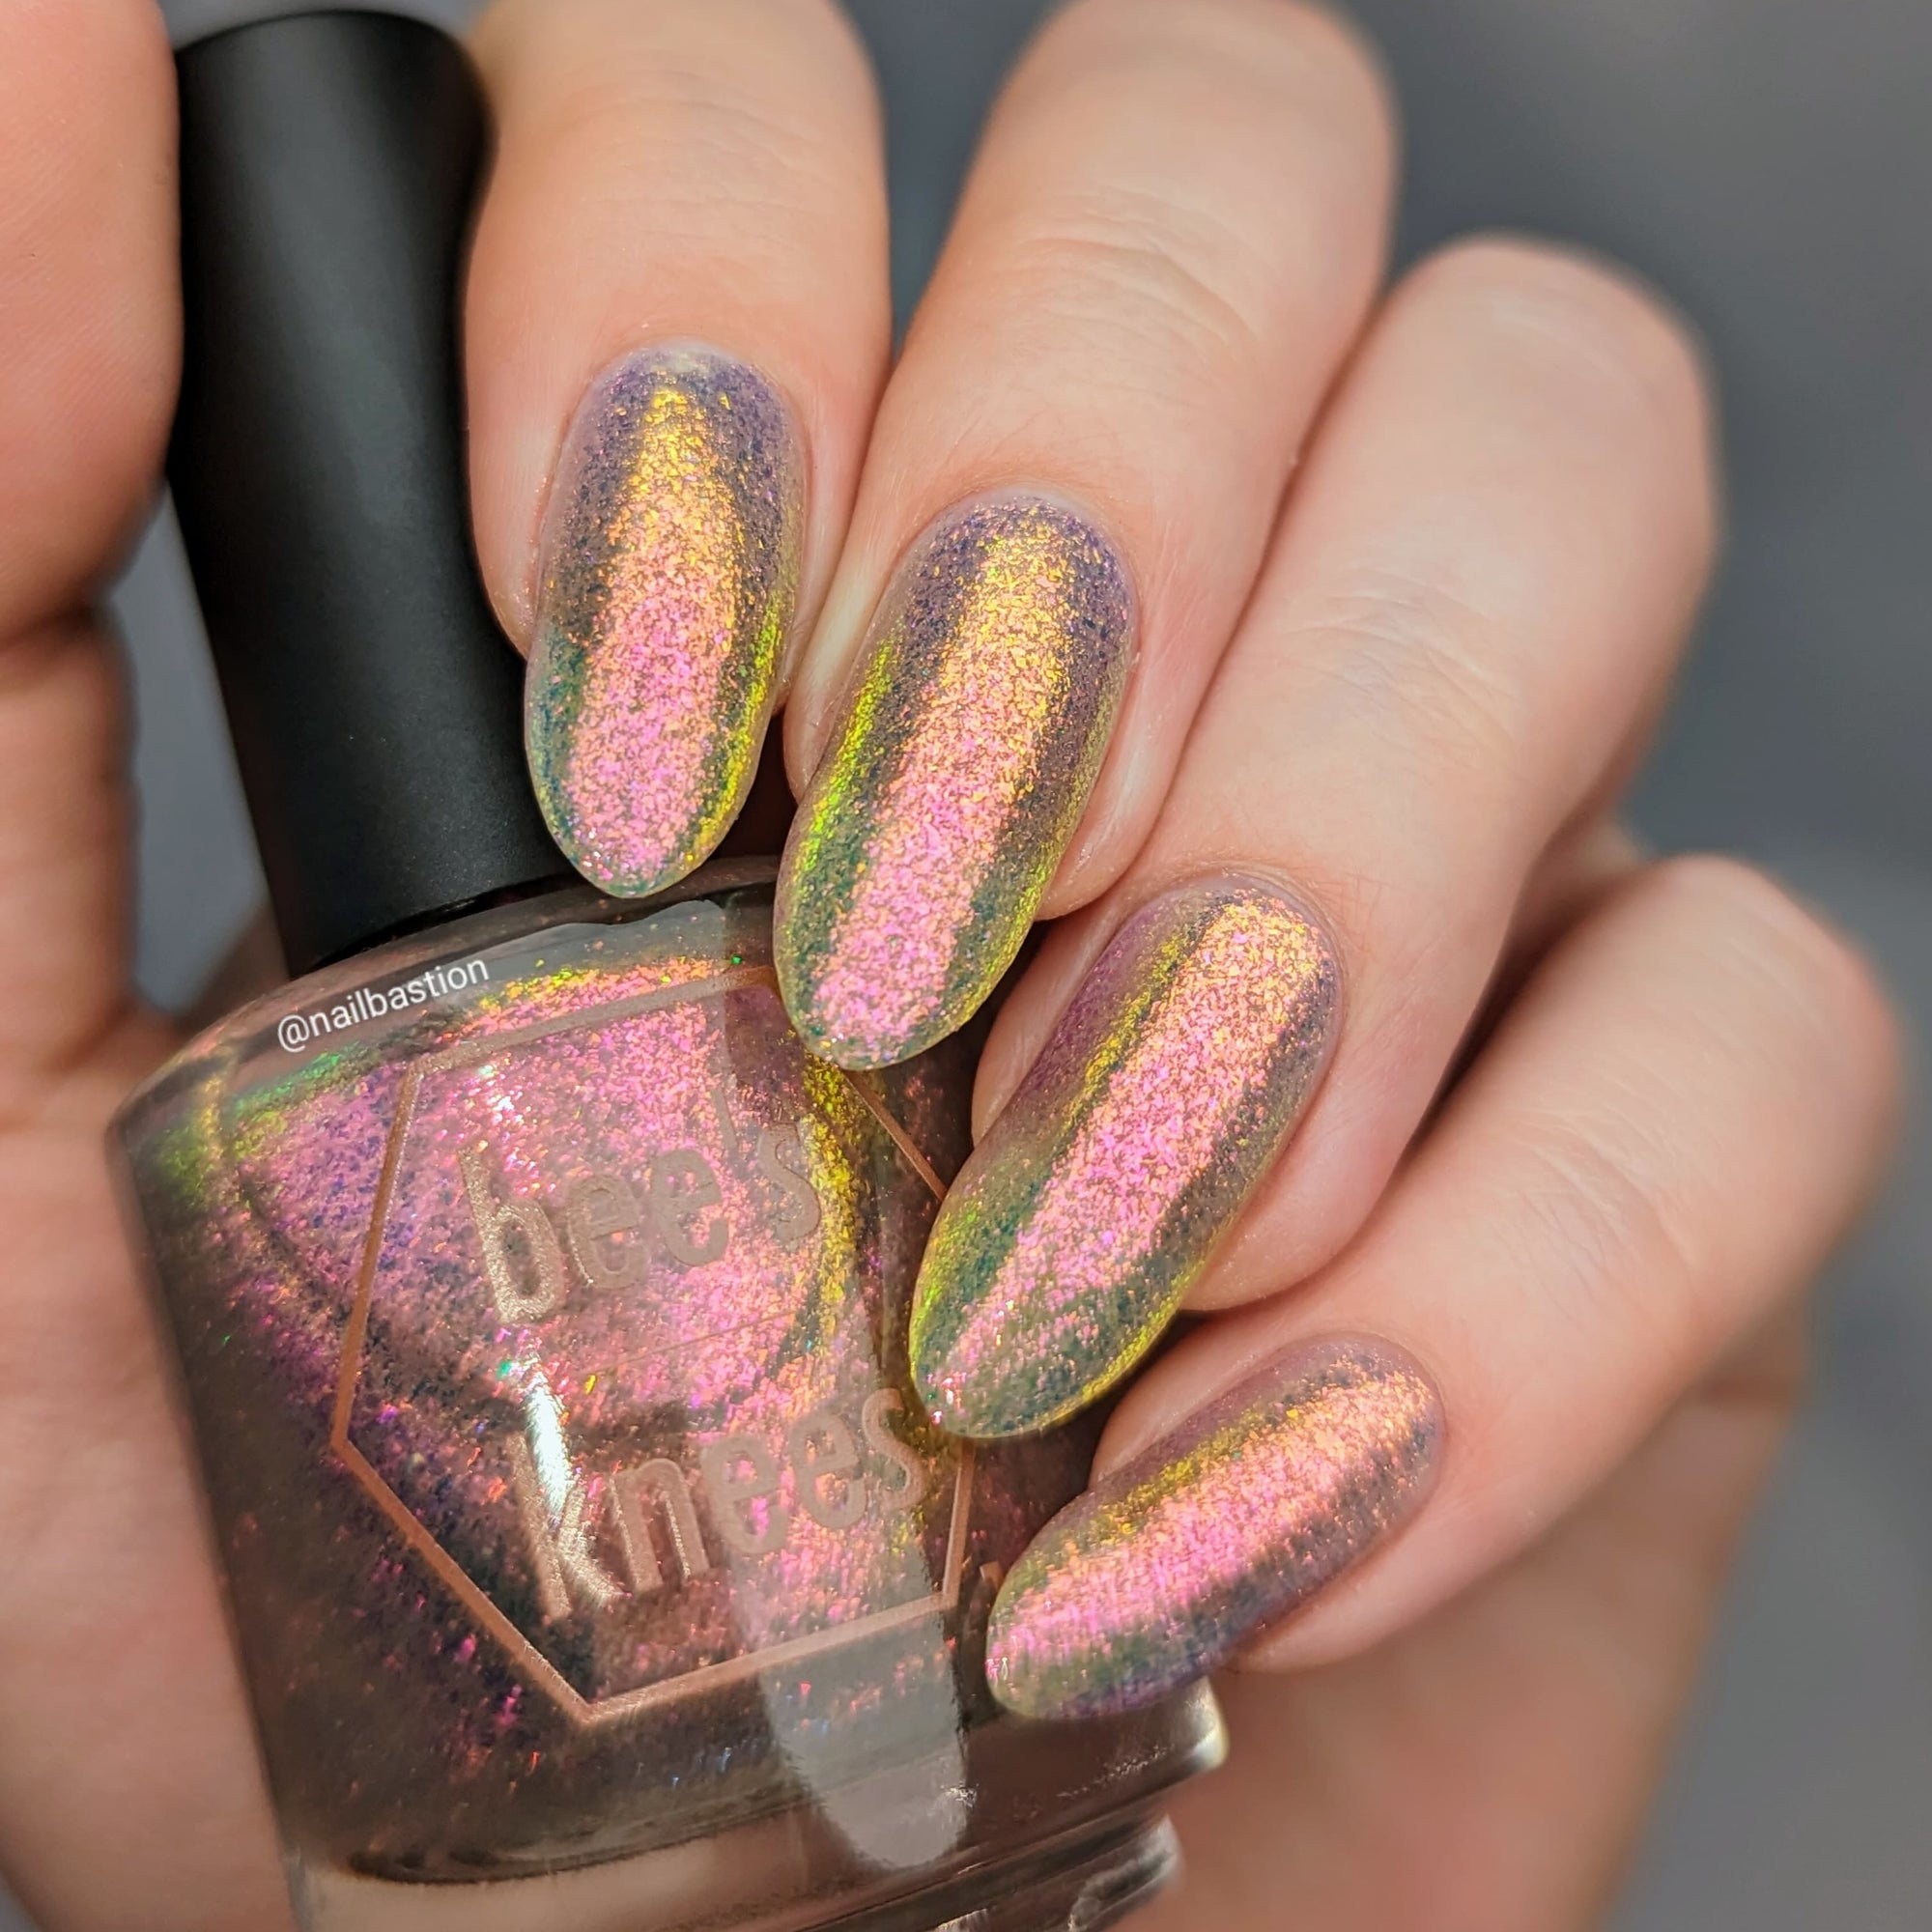 *PRE-ORDER* Bee's Knees Lacquer - Bewitched